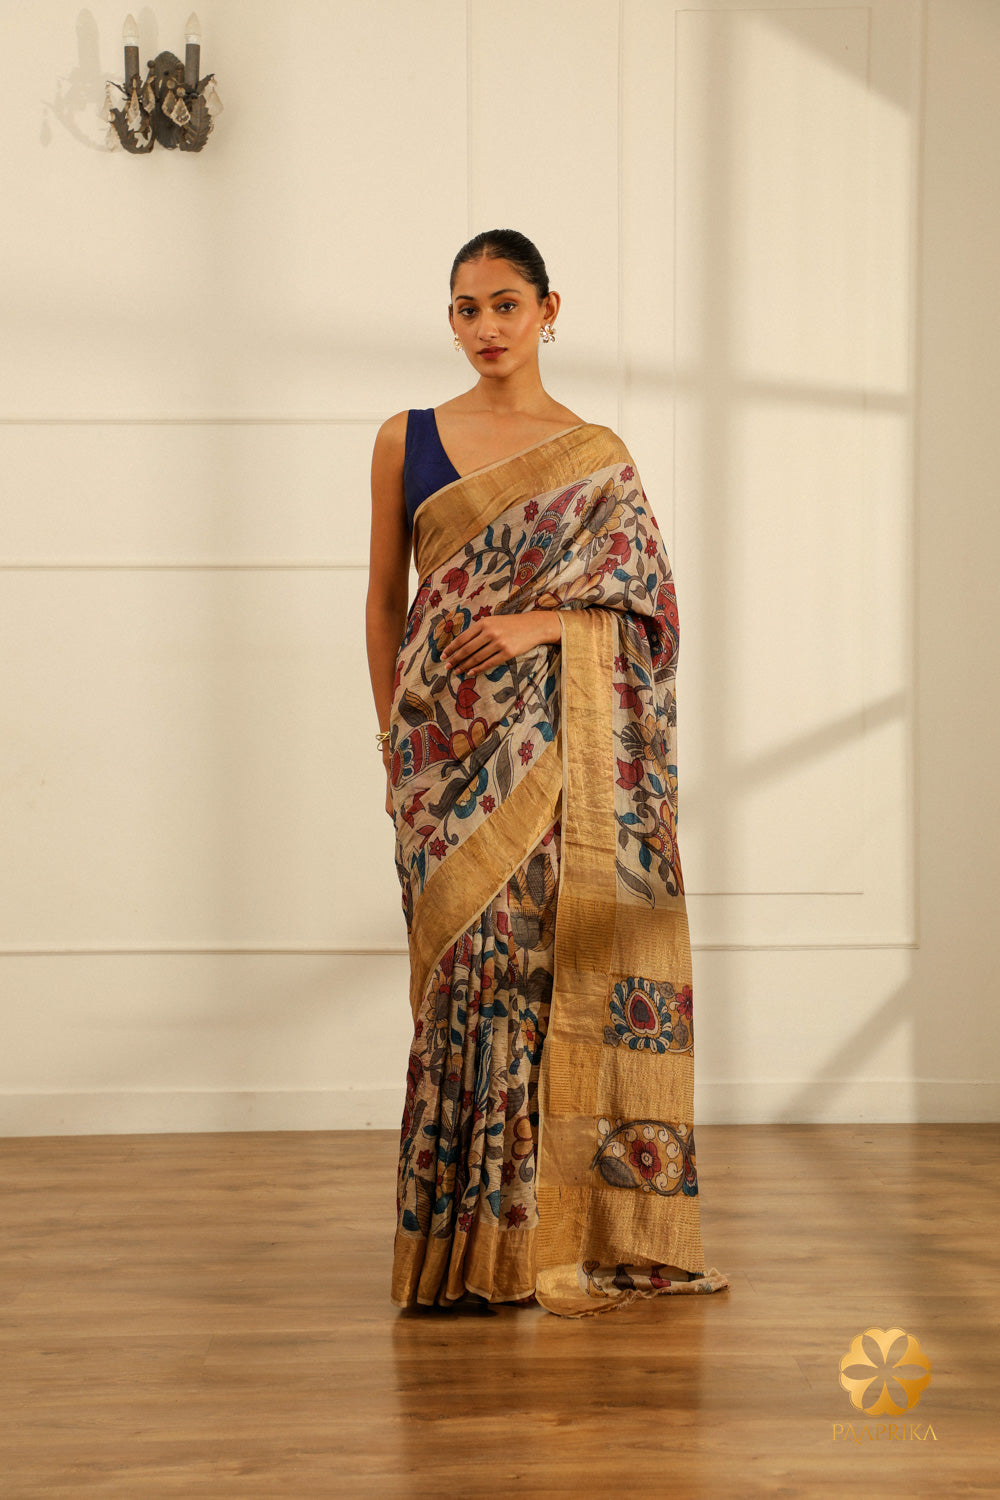 A full-length shot of a woman gracefully draped in the Cream Tussar Silk Saree, showcasing its elegance and the artistic floral creepers and leaves motifs.